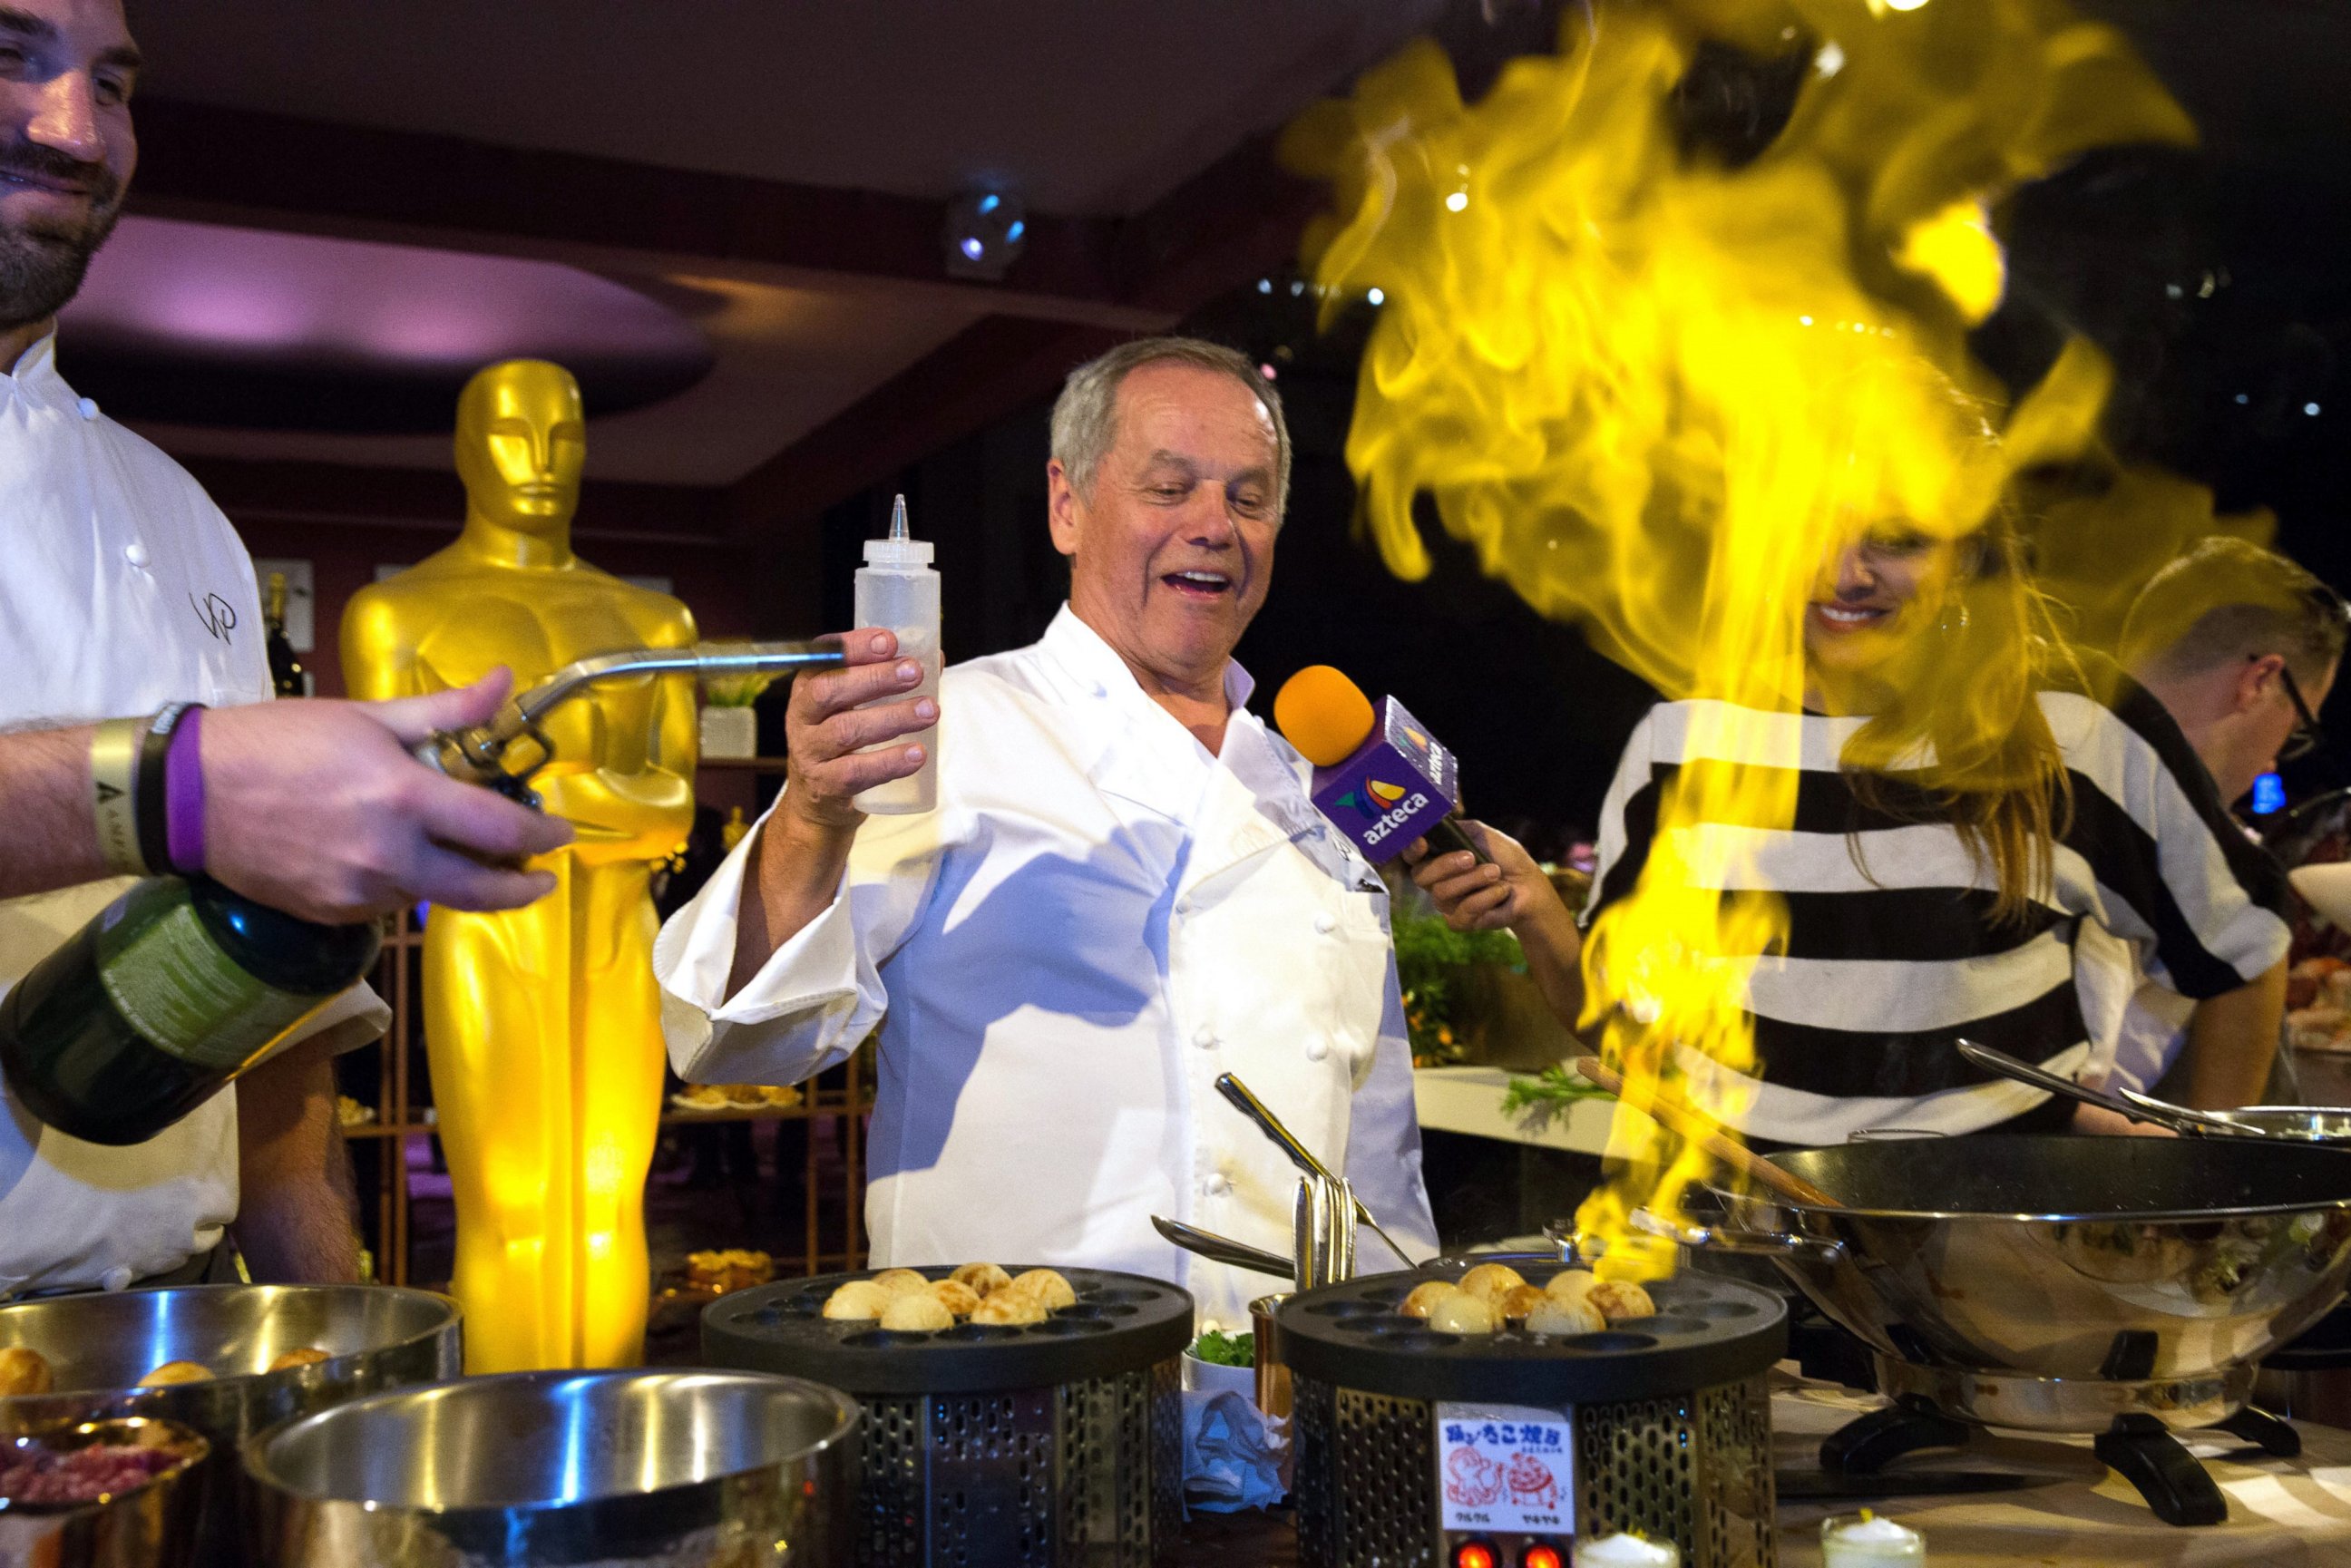 PHOTO: Wolfgang Puck, center, lights up a specialty donut during the press preview of the 88th Oscars Governors Ball in Hollywood, Calif., Feb. 18, 2016. The event is the official post-Oscars celebration that will take place on Feb. 28. 